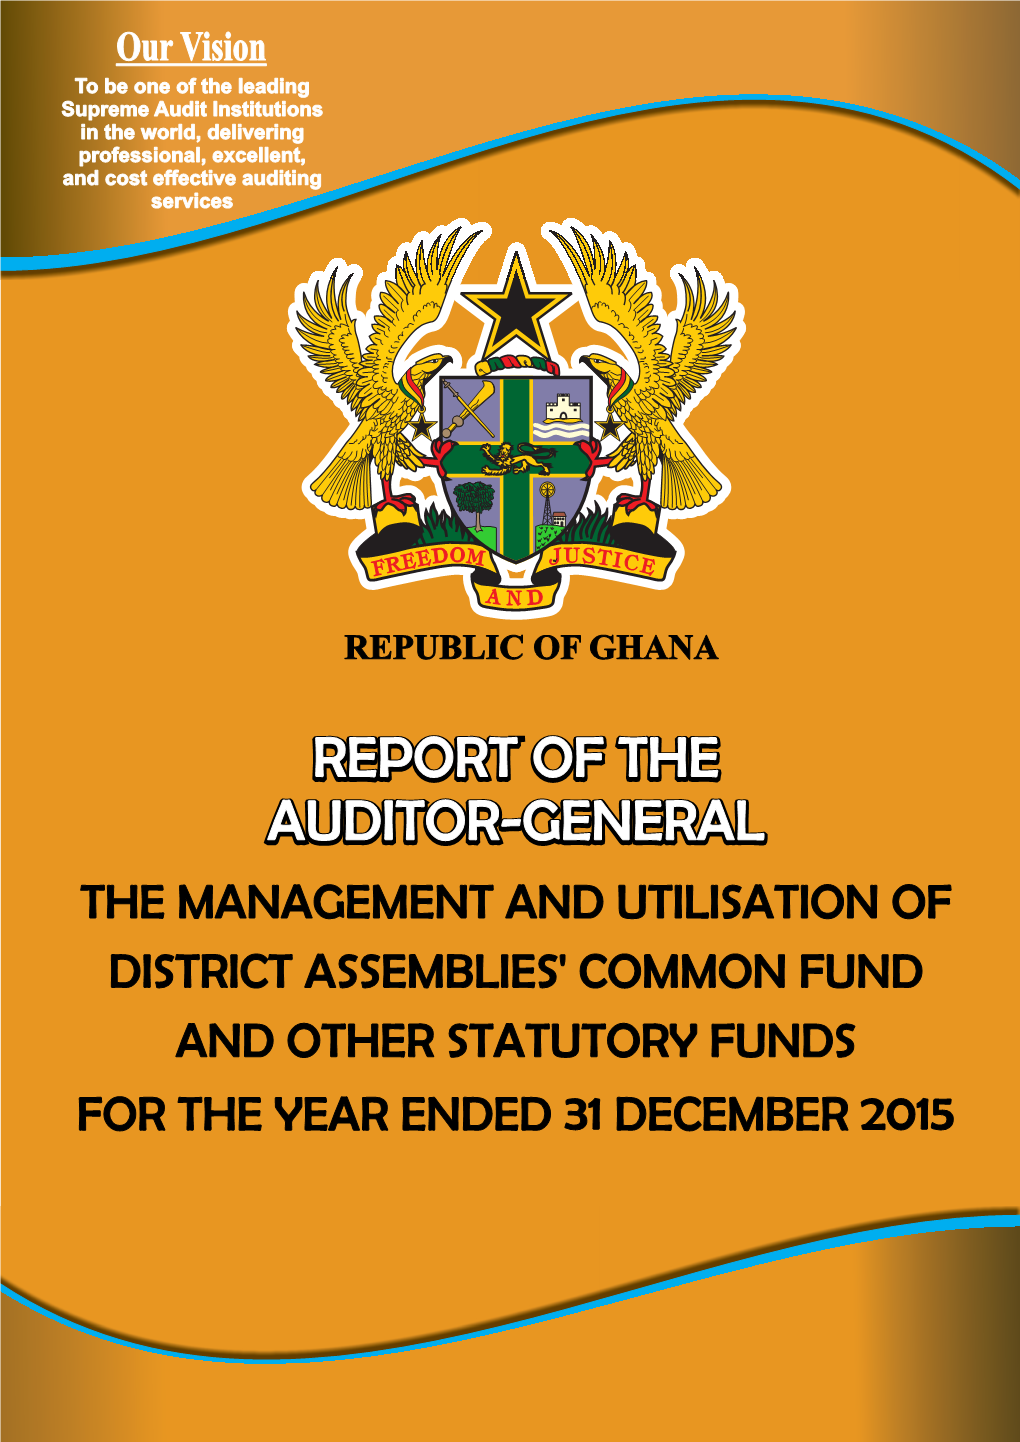 Report of the Auditor-General on the Management